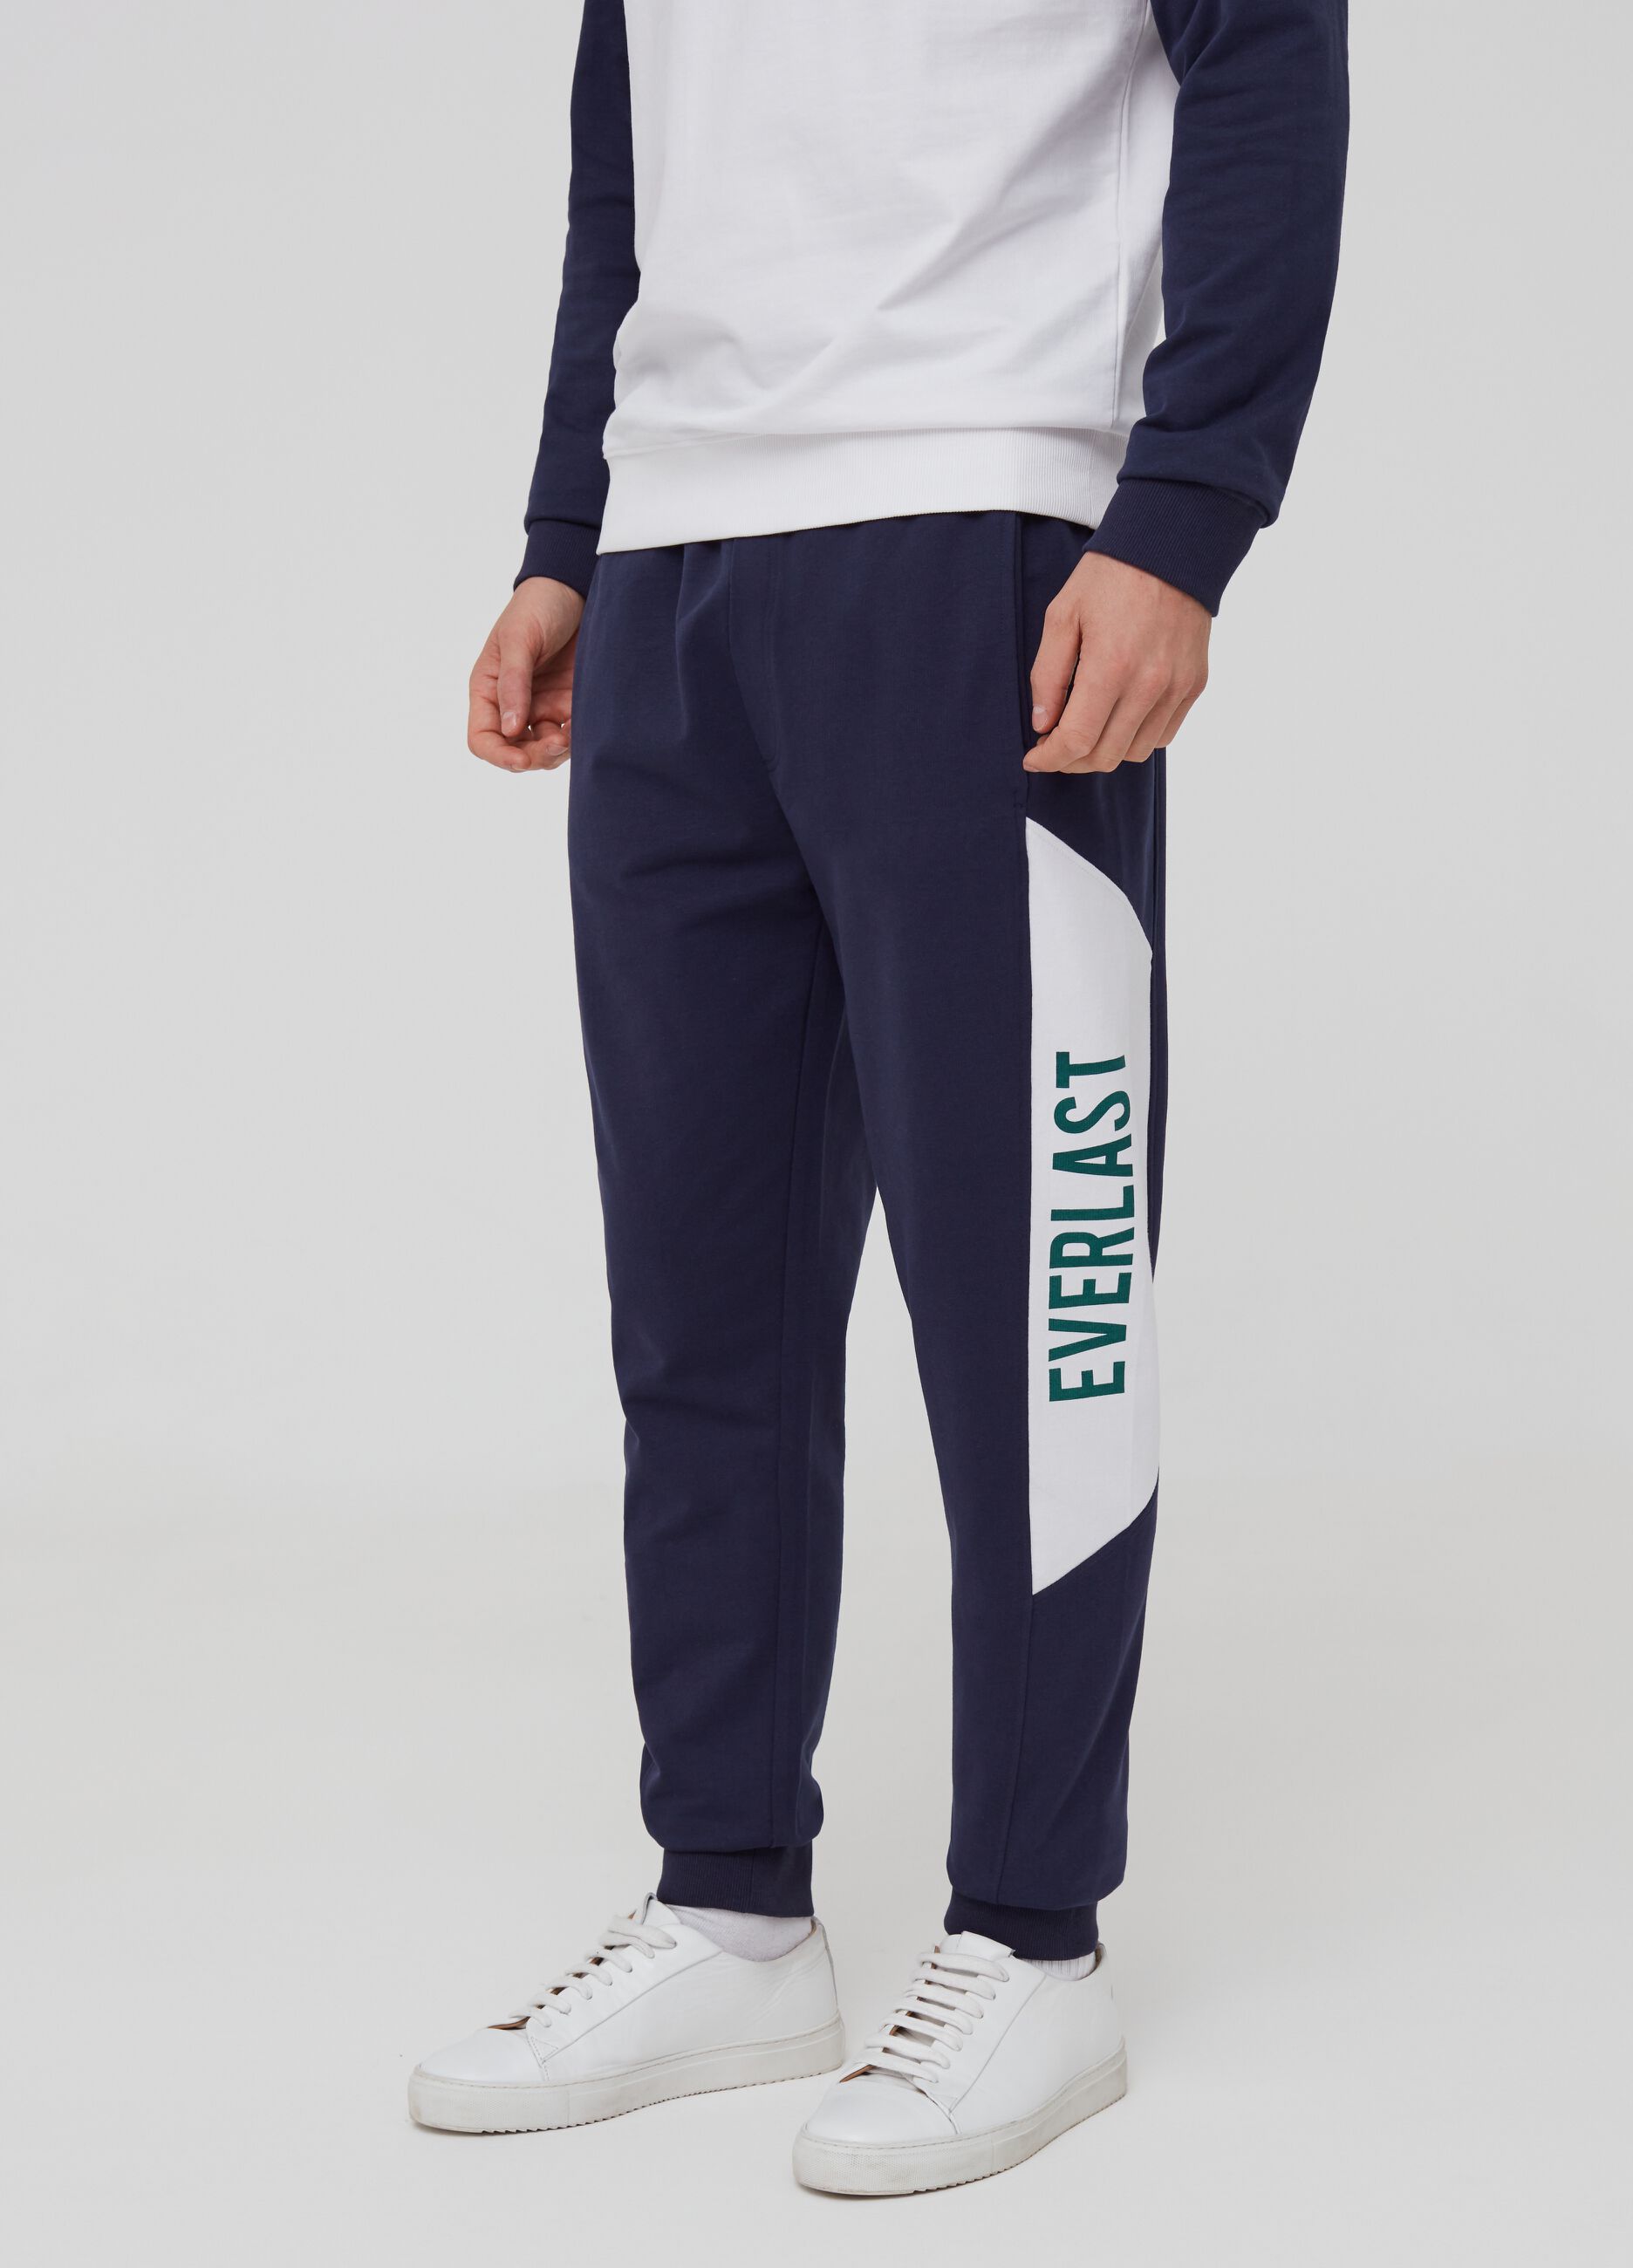 Joggers with Everlast print